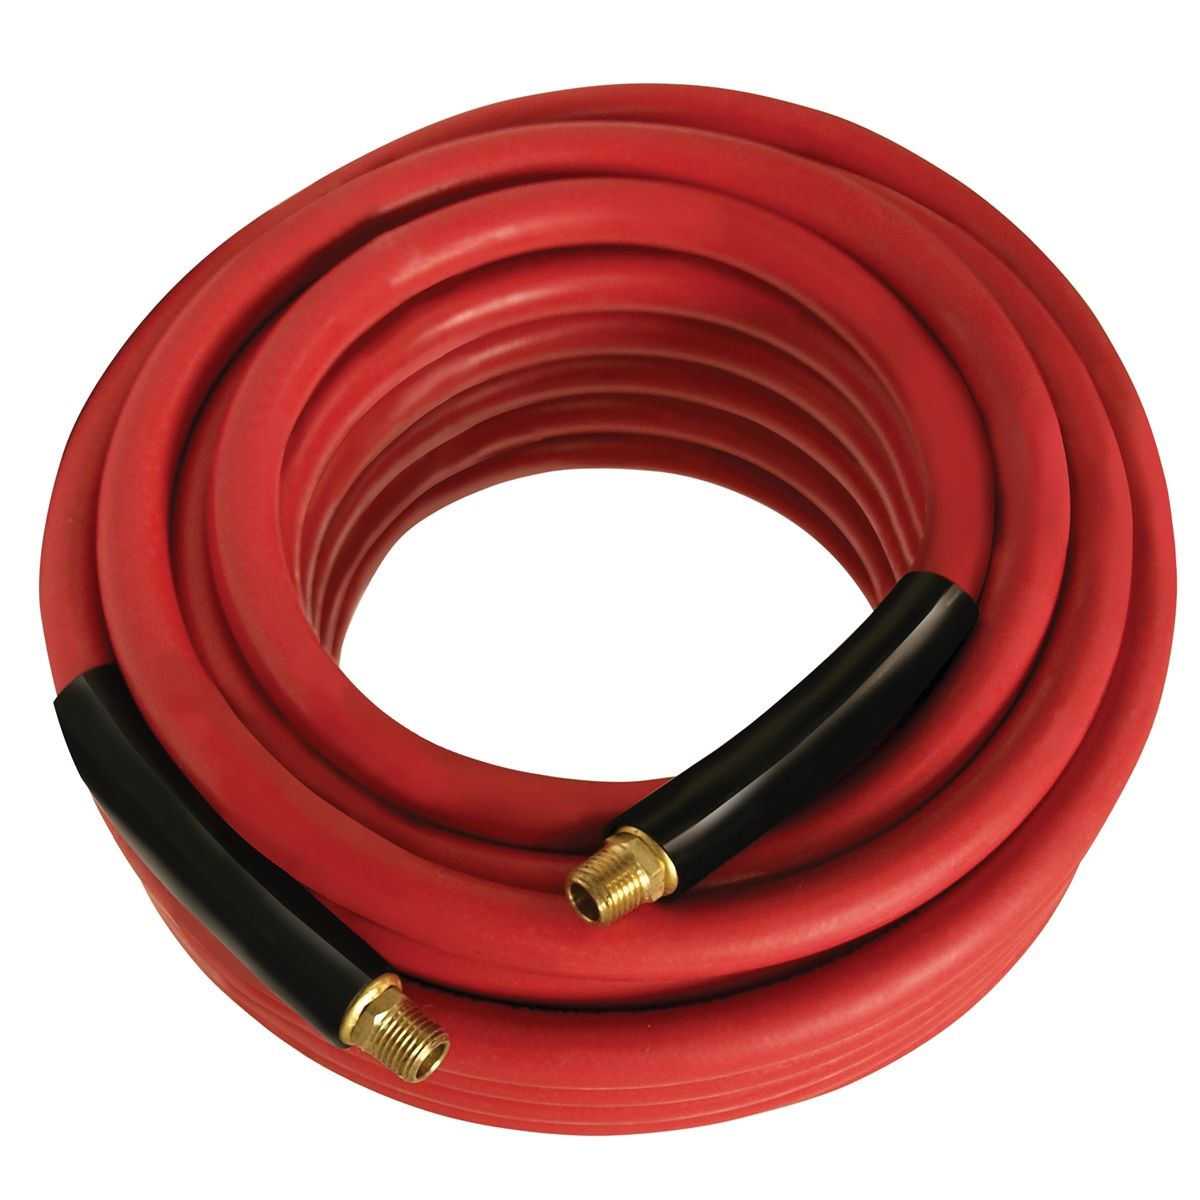 Reinforced Rubber Air Hose 300 psi 3/8" x 50' ft 